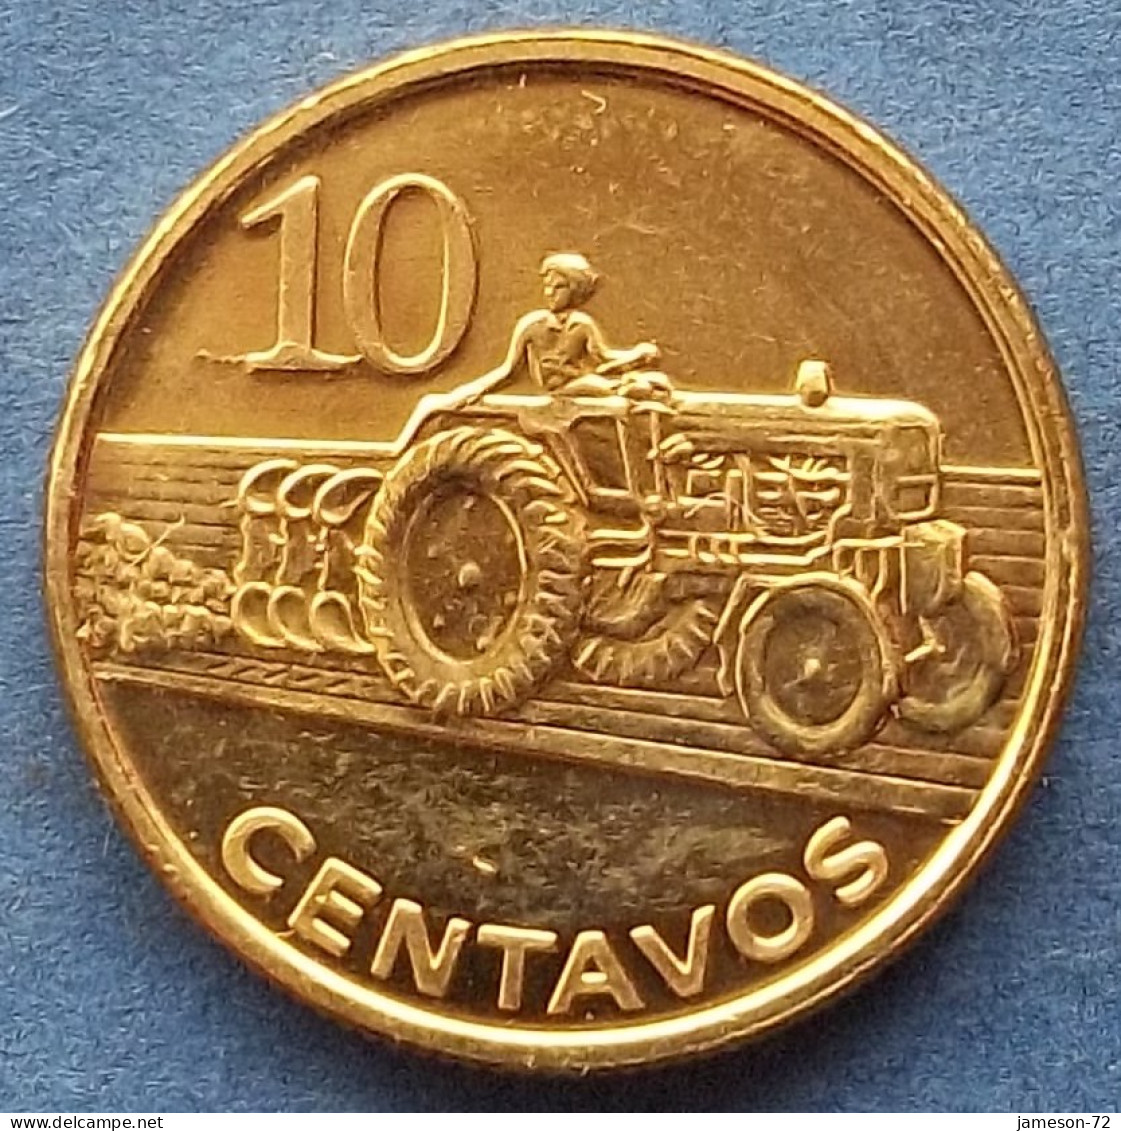 MOZAMBIQUE - 10 Centavos 2006 "Farmer Cultivating" KM# 134 Peoples Republic Reform Coinage (2006) - Edelweiss Coins - Mozambique